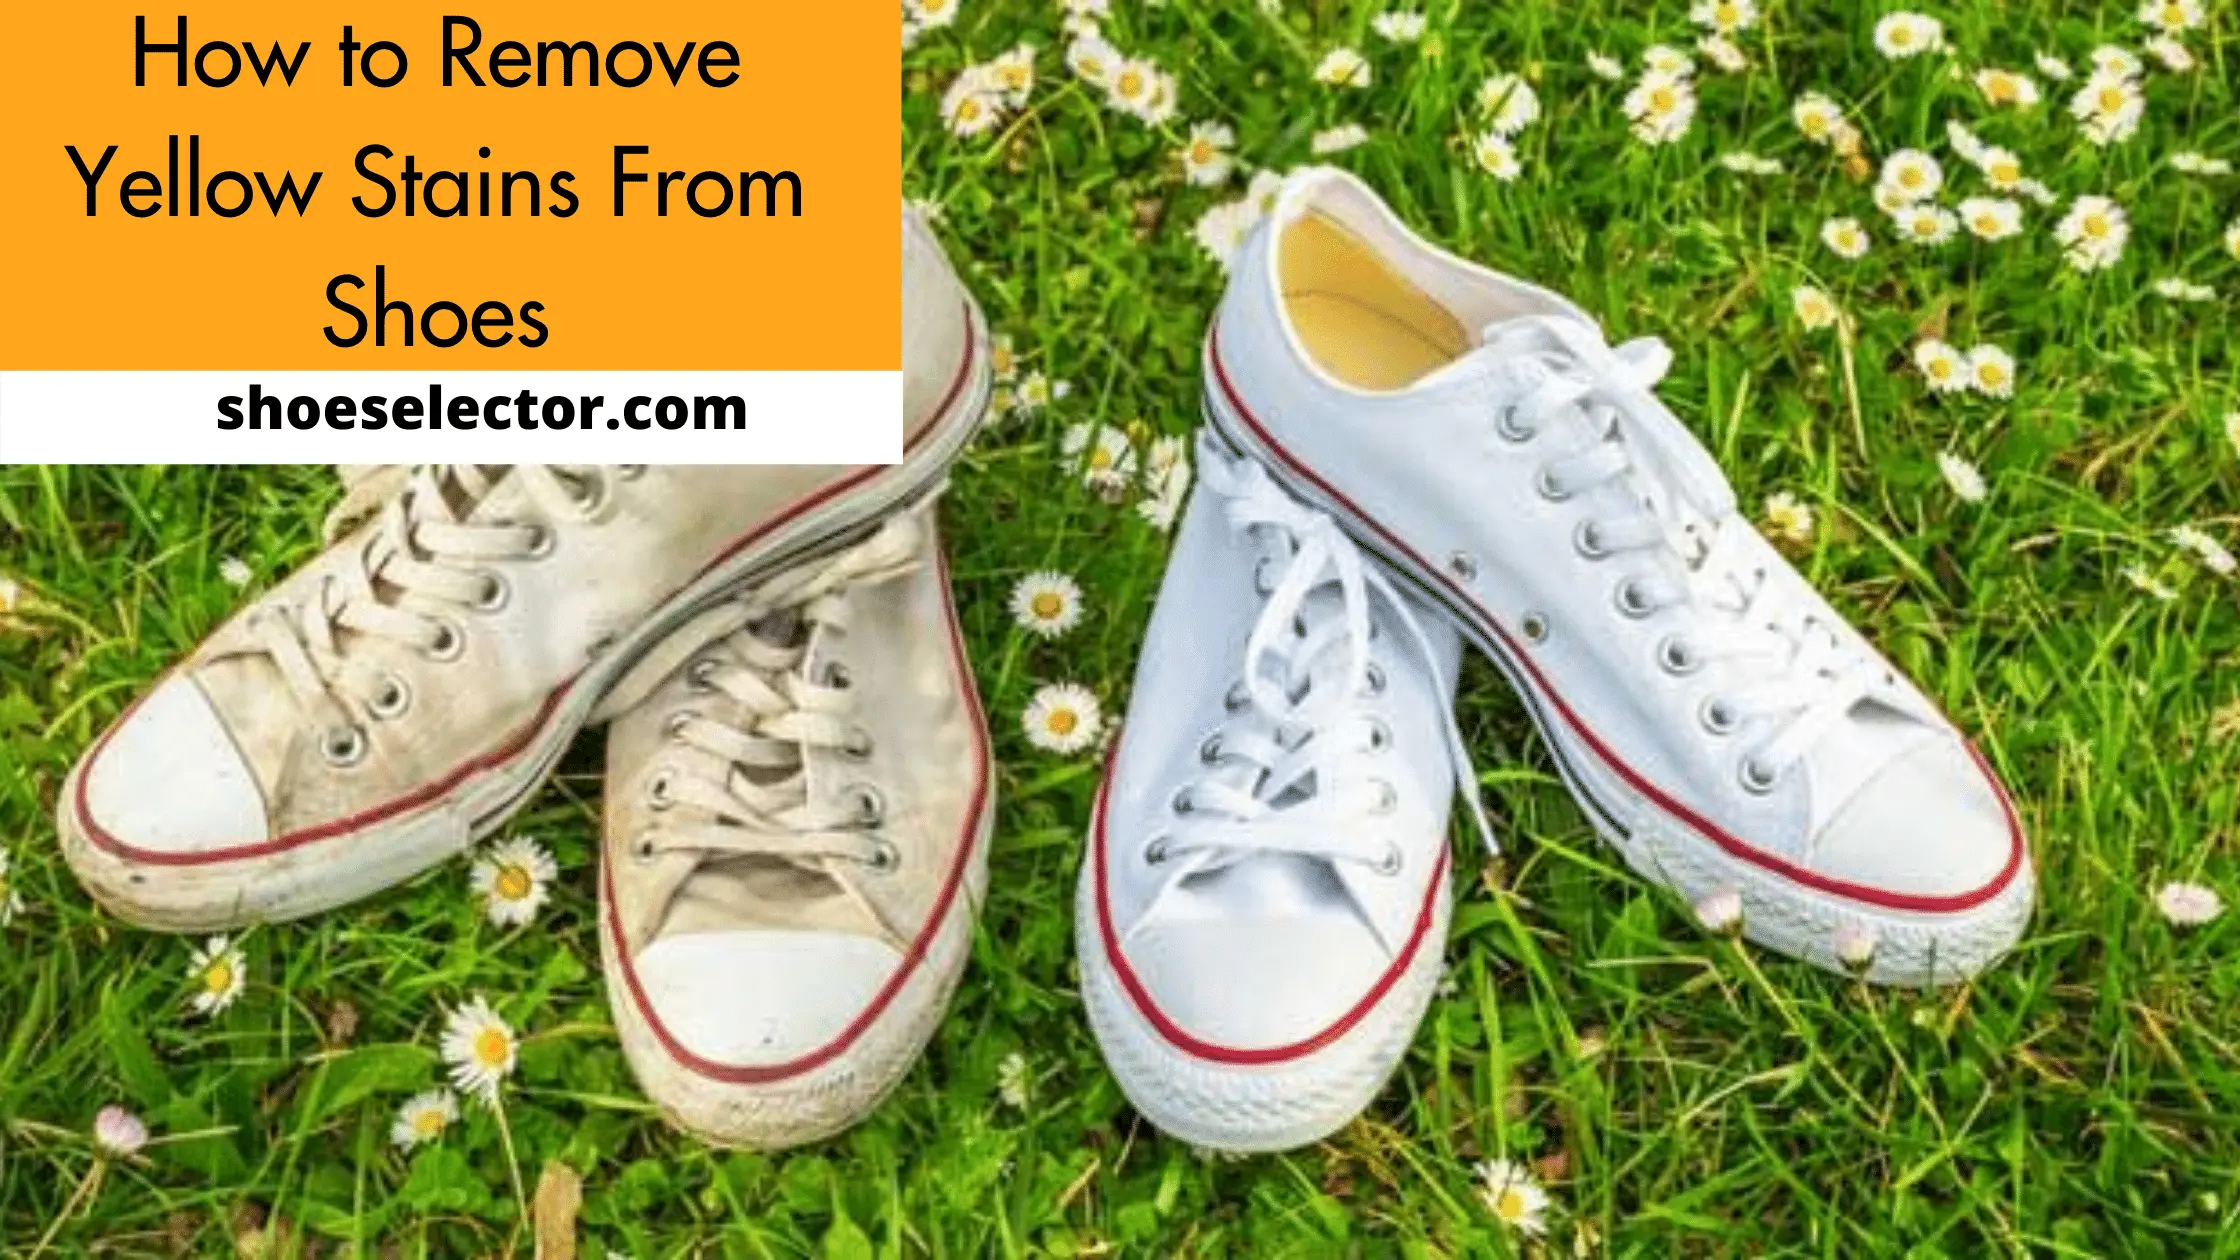 How to Remove Yellow Stains From Shoes? - Unique Guide